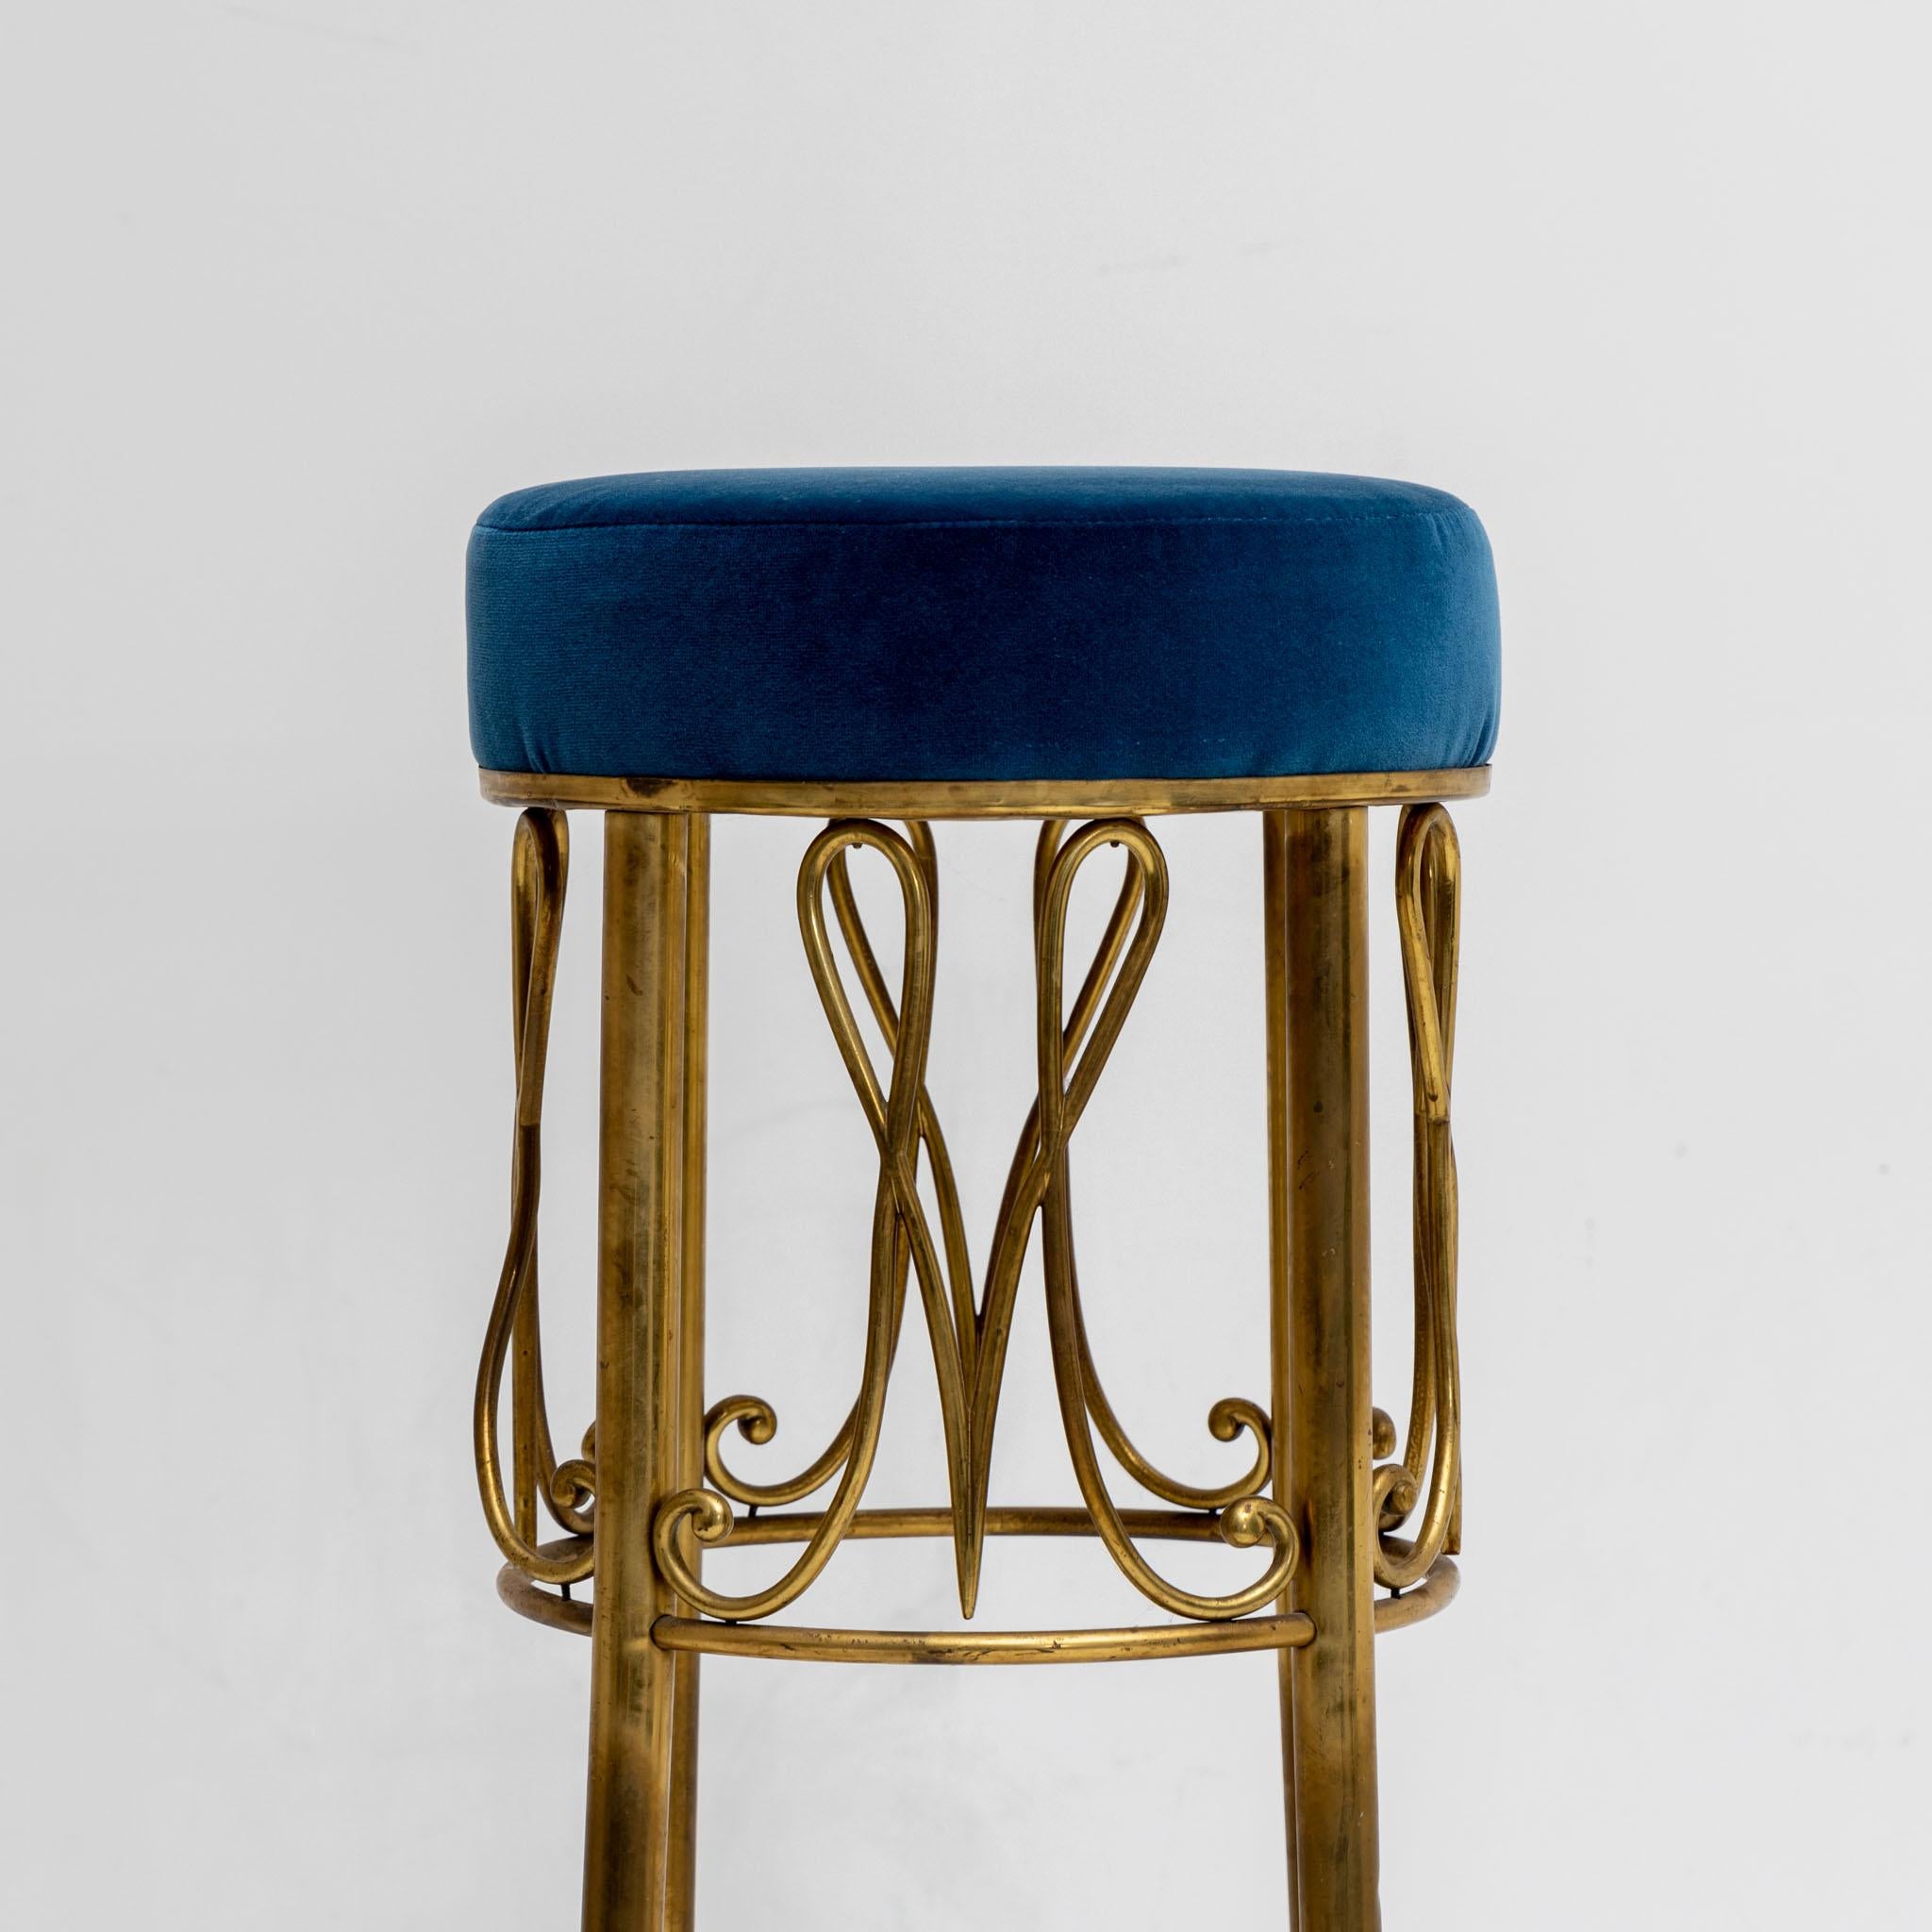 Upholstered bar stool with blue velvet cover and brass frame with M-shaped motifs.